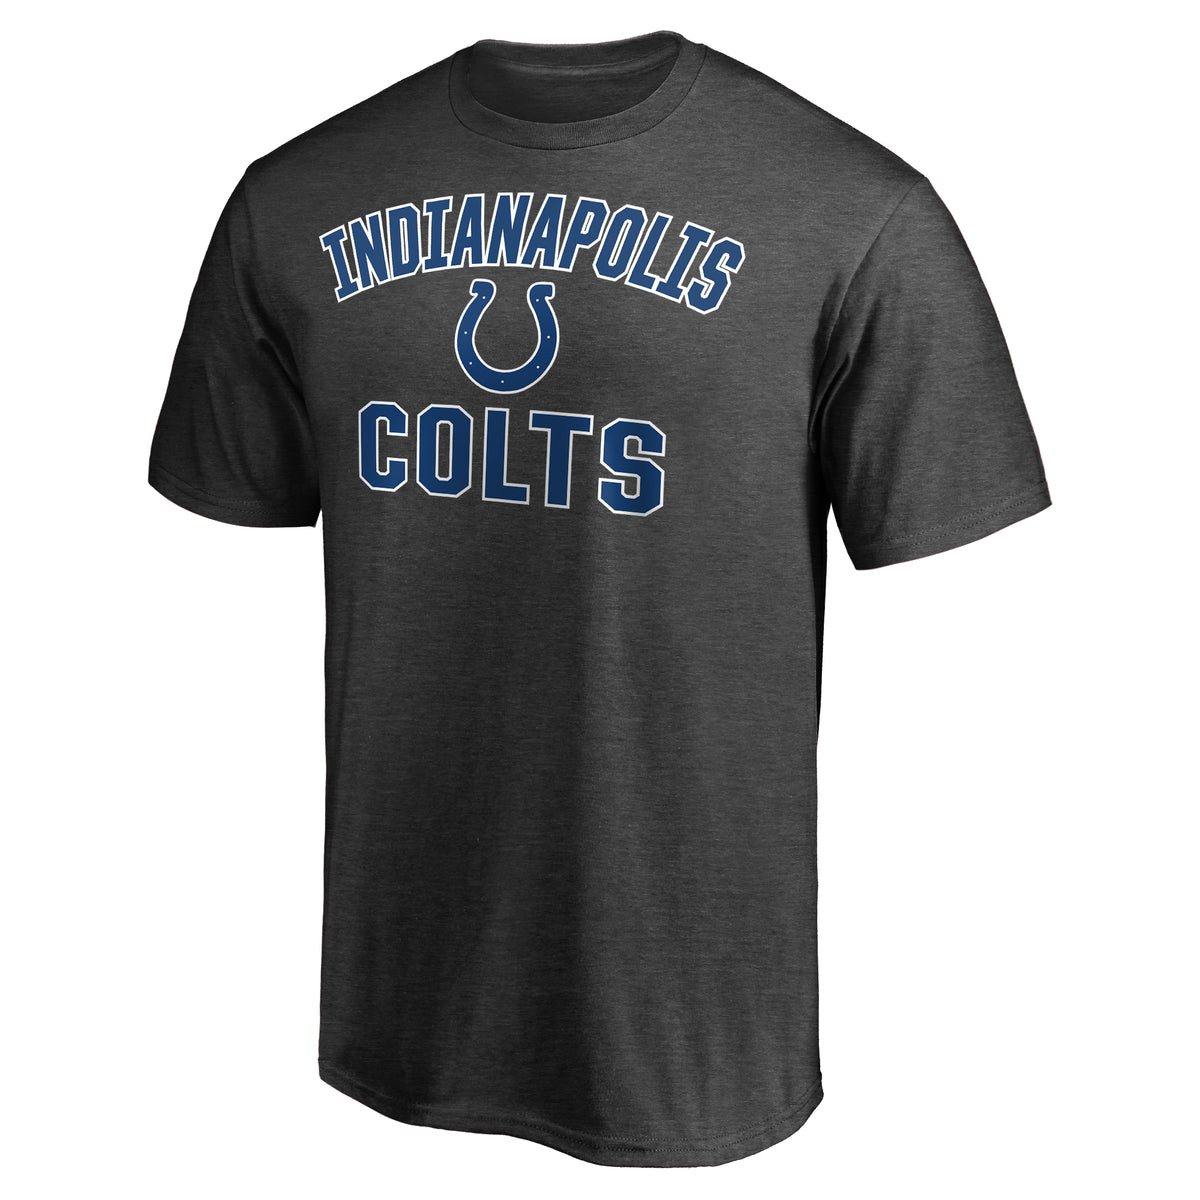 NFL Indianapolis Colts Fanatics Victory Arch Tee